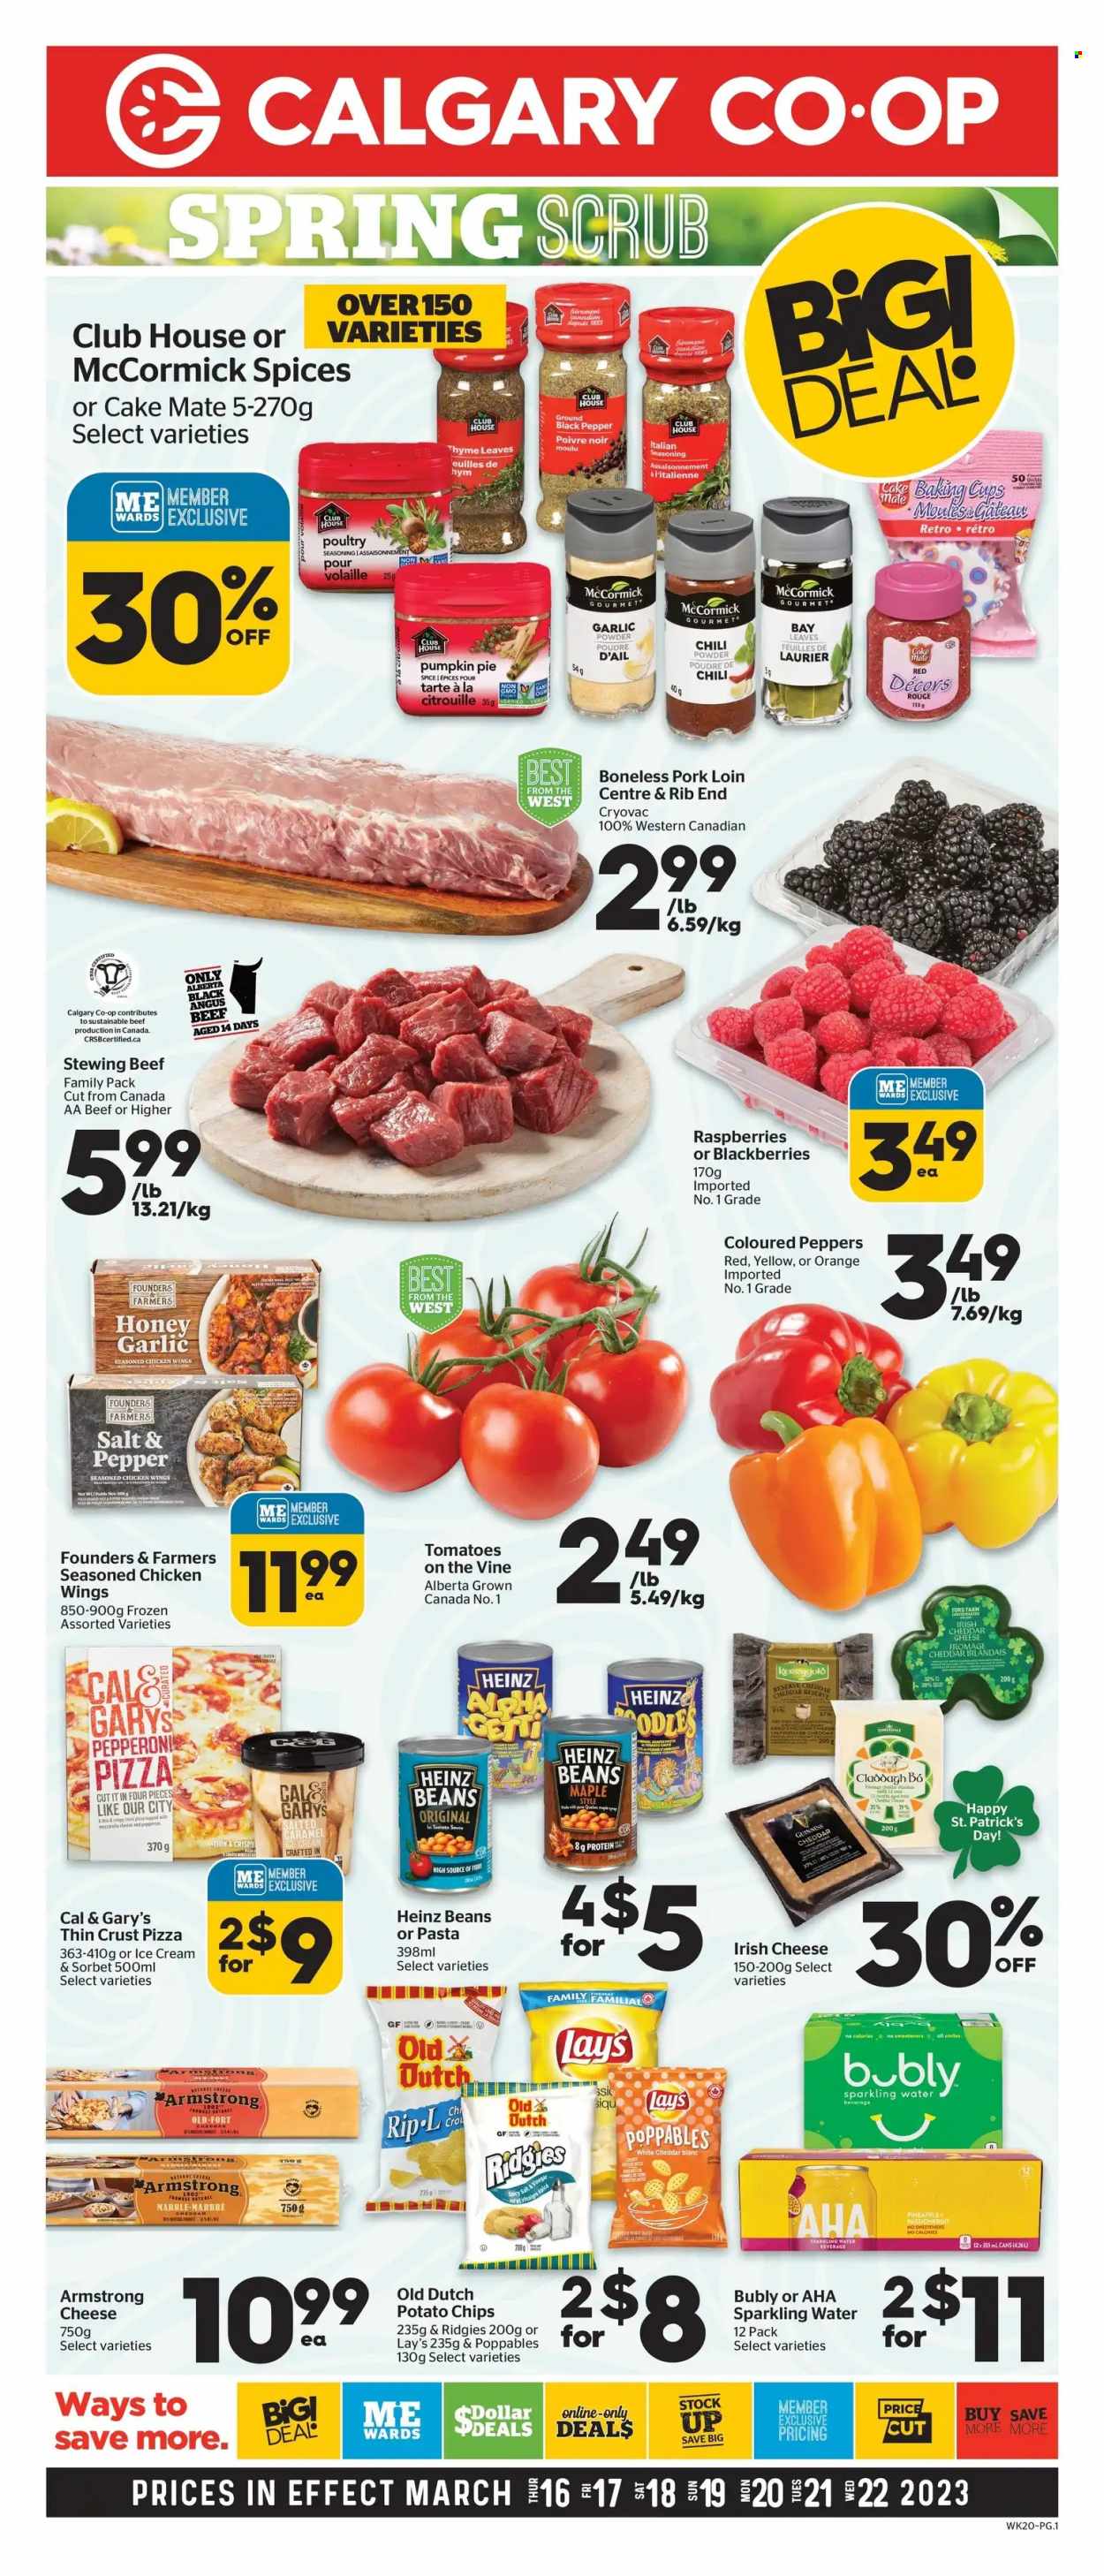 thumbnail - Calgary Co-op Flyer - March 16, 2023 - March 22, 2023 - Sales products - cake, pie, beans, pumpkin, peppers, blackberries, pineapple, oranges, pizza, pepperoni, cheese, ice cream, chicken wings, potato chips, Lay’s, spice, garlic powder, honey, sparkling water, water, Guinness, beef meat, stewing beef, pork loin, pork meat, Heinz. Page 1.